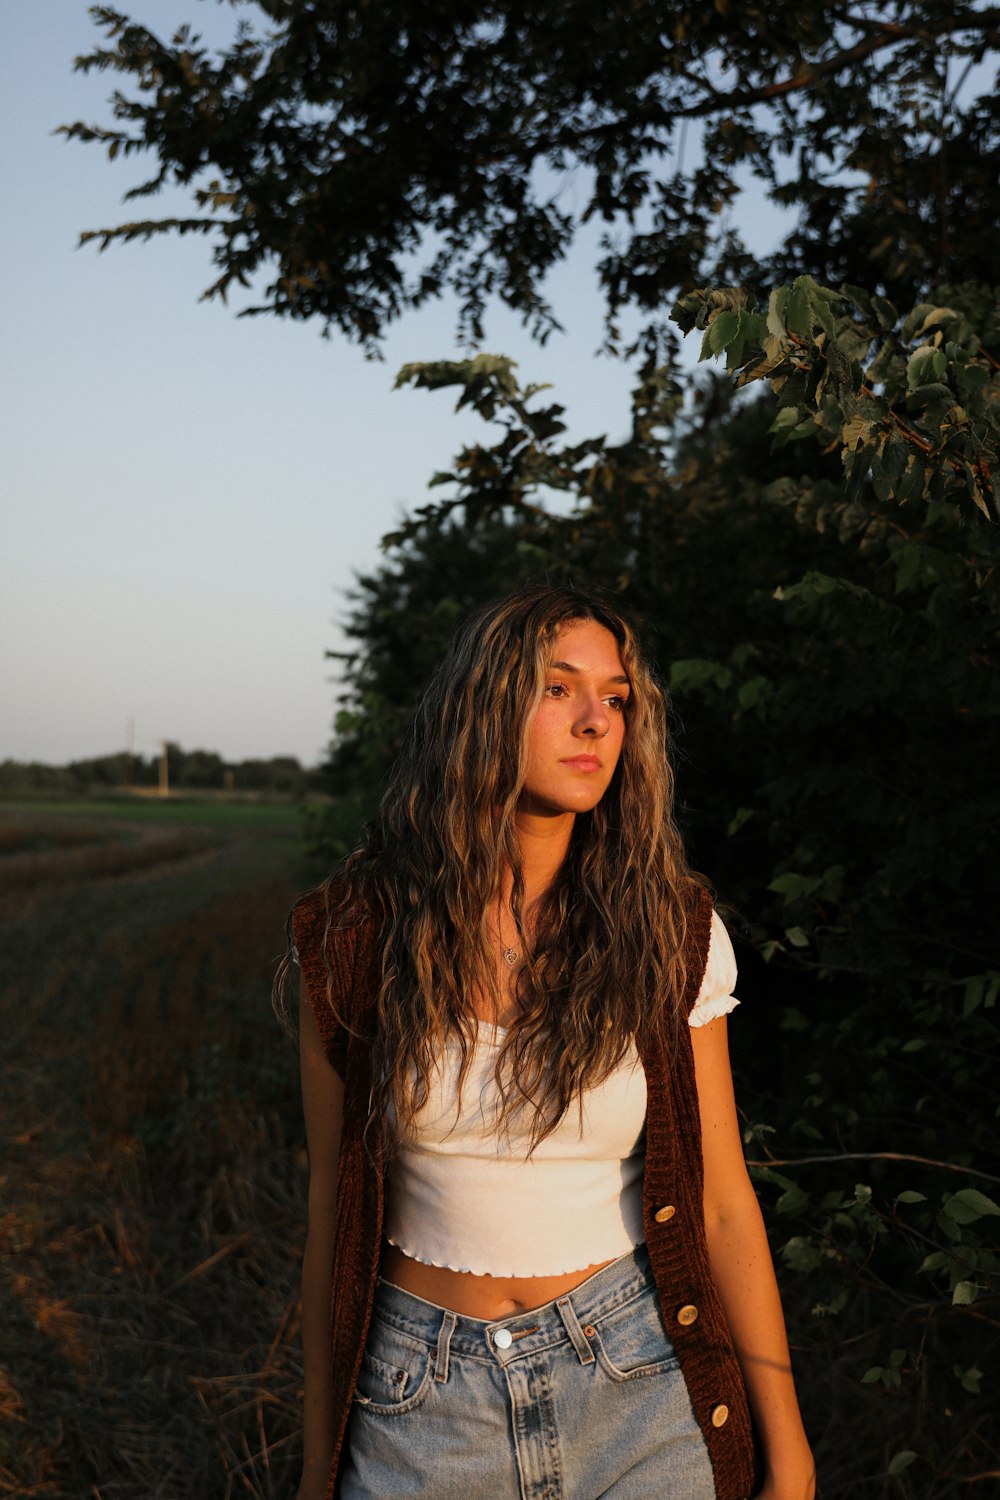 woman in white tank top standing near green tree during daytime